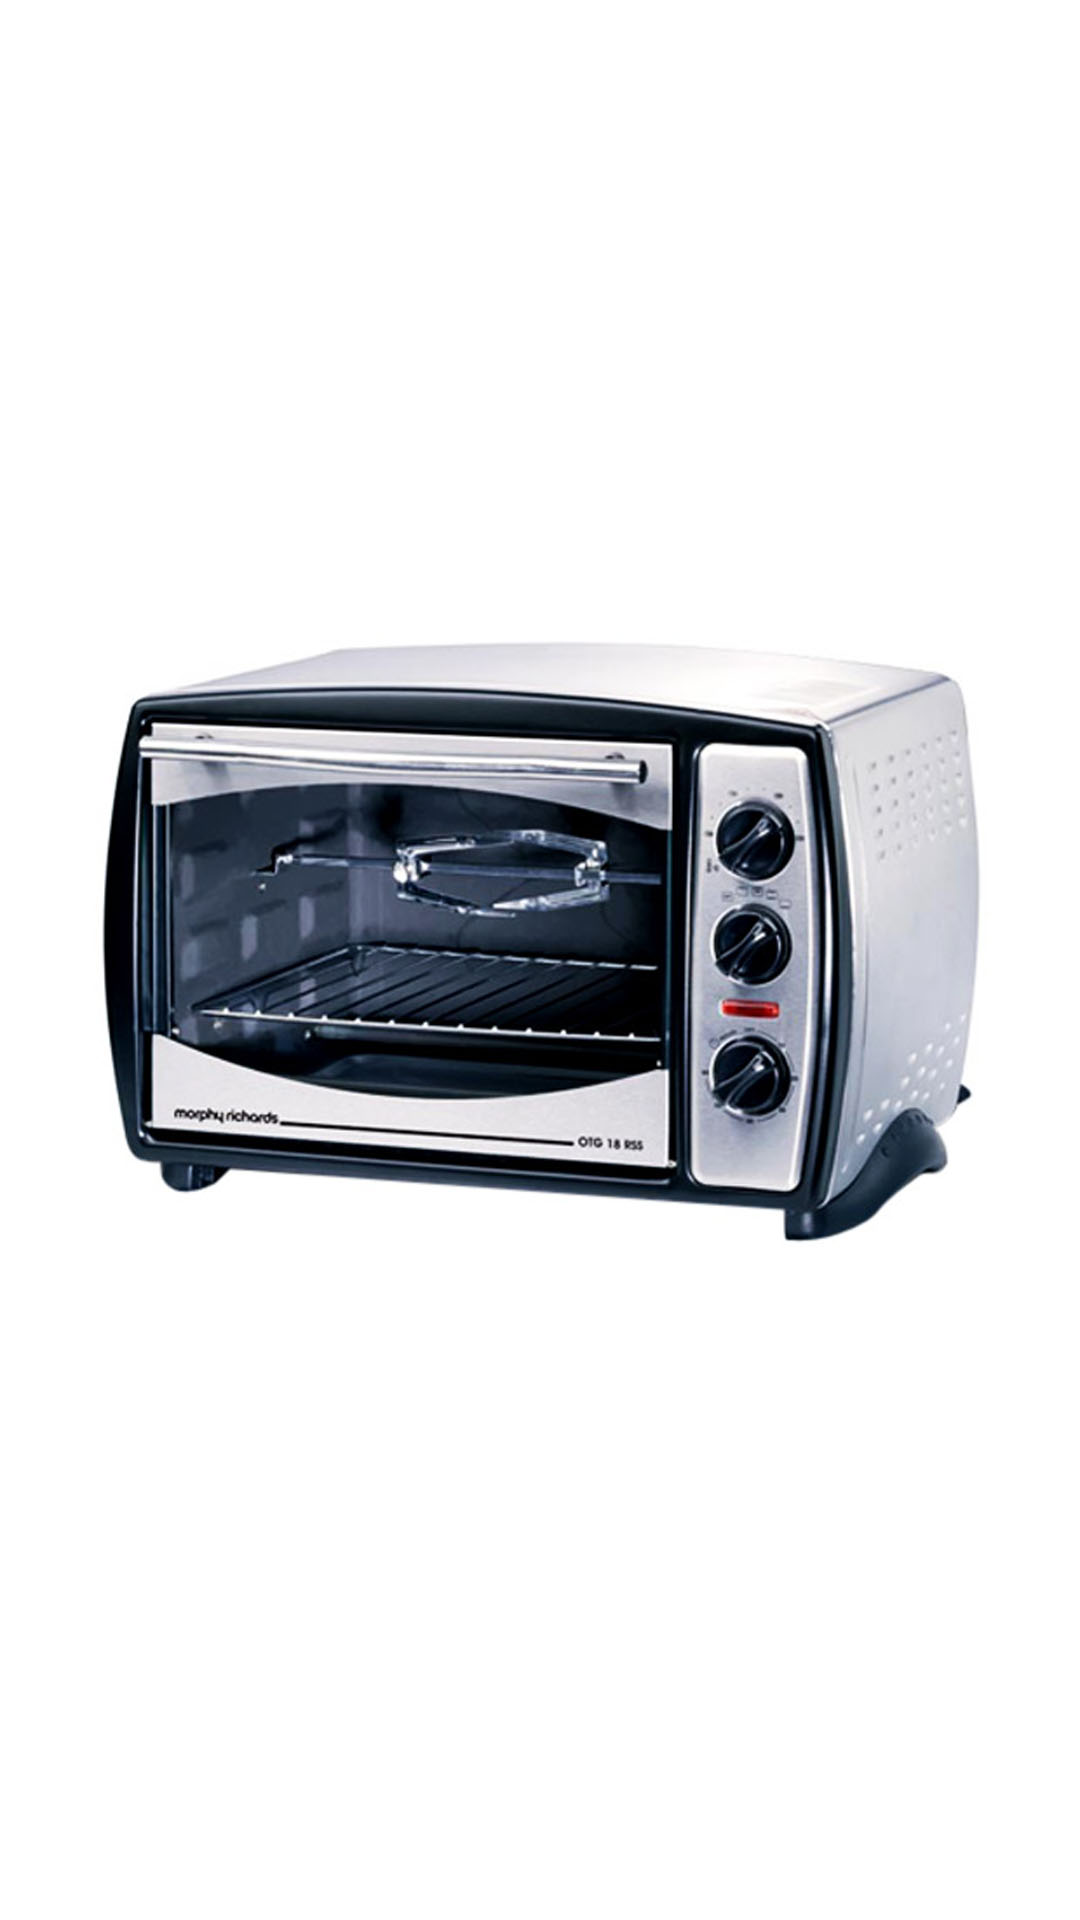 morphy richards microwave oven user manual